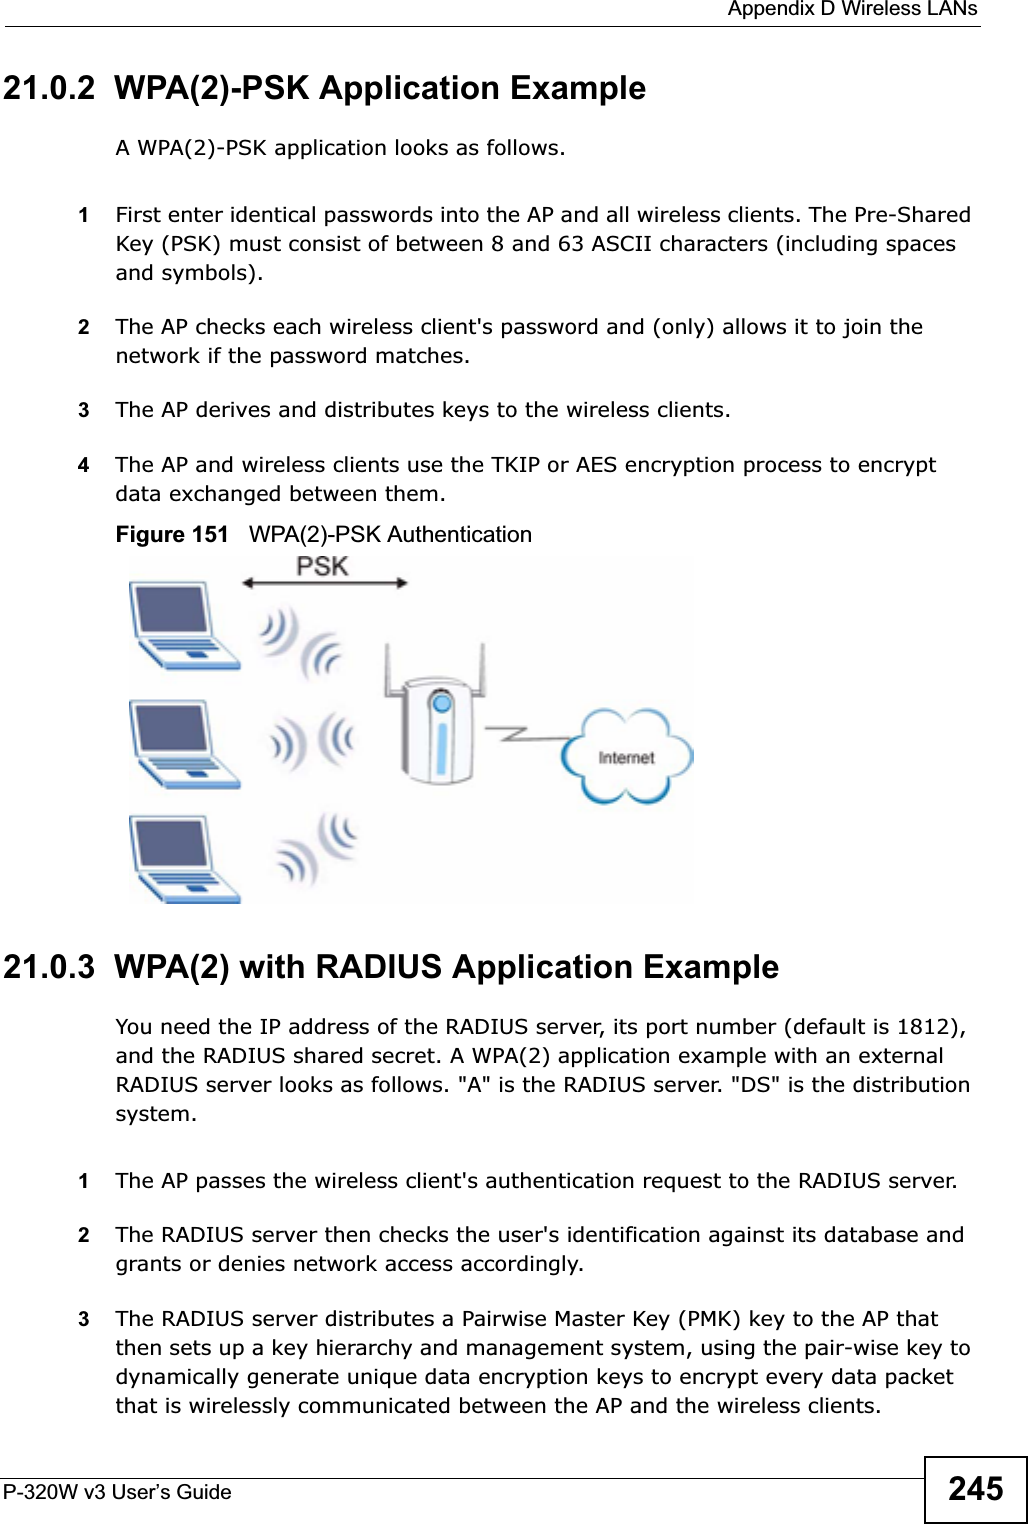  Appendix D Wireless LANsP-320W v3 User’s Guide 24521.0.2  WPA(2)-PSK Application ExampleA WPA(2)-PSK application looks as follows.1First enter identical passwords into the AP and all wireless clients. The Pre-Shared Key (PSK) must consist of between 8 and 63 ASCII characters (including spaces and symbols).2The AP checks each wireless client&apos;s password and (only) allows it to join the network if the password matches.3The AP derives and distributes keys to the wireless clients.4The AP and wireless clients use the TKIP or AES encryption process to encrypt data exchanged between them.Figure 151   WPA(2)-PSK Authentication21.0.3  WPA(2) with RADIUS Application ExampleYou need the IP address of the RADIUS server, its port number (default is 1812), and the RADIUS shared secret. A WPA(2) application example with an external RADIUS server looks as follows. &quot;A&quot; is the RADIUS server. &quot;DS&quot; is the distribution system.1The AP passes the wireless client&apos;s authentication request to the RADIUS server.2The RADIUS server then checks the user&apos;s identification against its database and grants or denies network access accordingly.3The RADIUS server distributes a Pairwise Master Key (PMK) key to the AP that then sets up a key hierarchy and management system, using the pair-wise key to dynamically generate unique data encryption keys to encrypt every data packet that is wirelessly communicated between the AP and the wireless clients. 